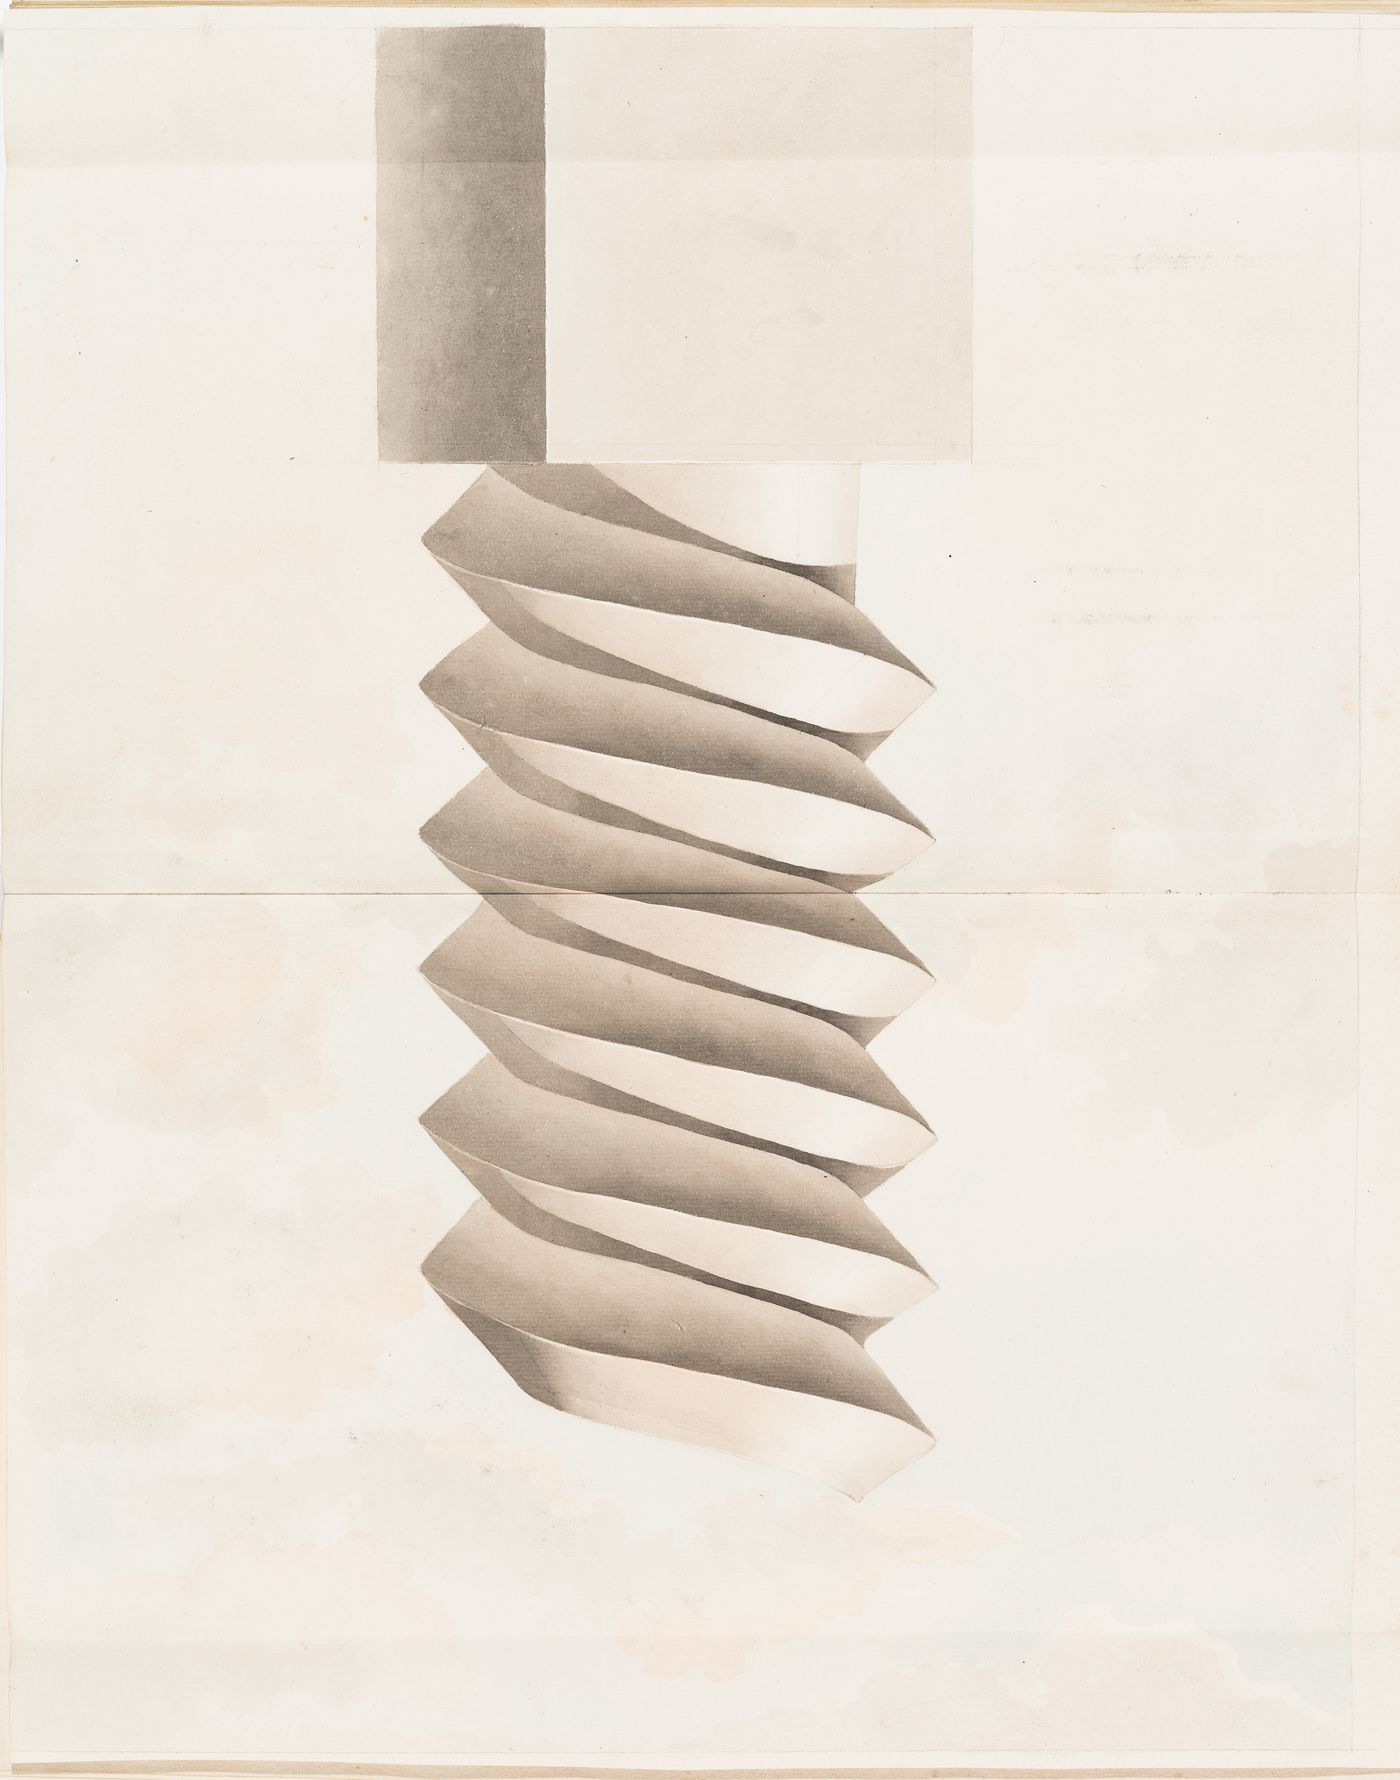 Elevation of a spiral rendered with light and shade and a backdrop of a cloudy sky